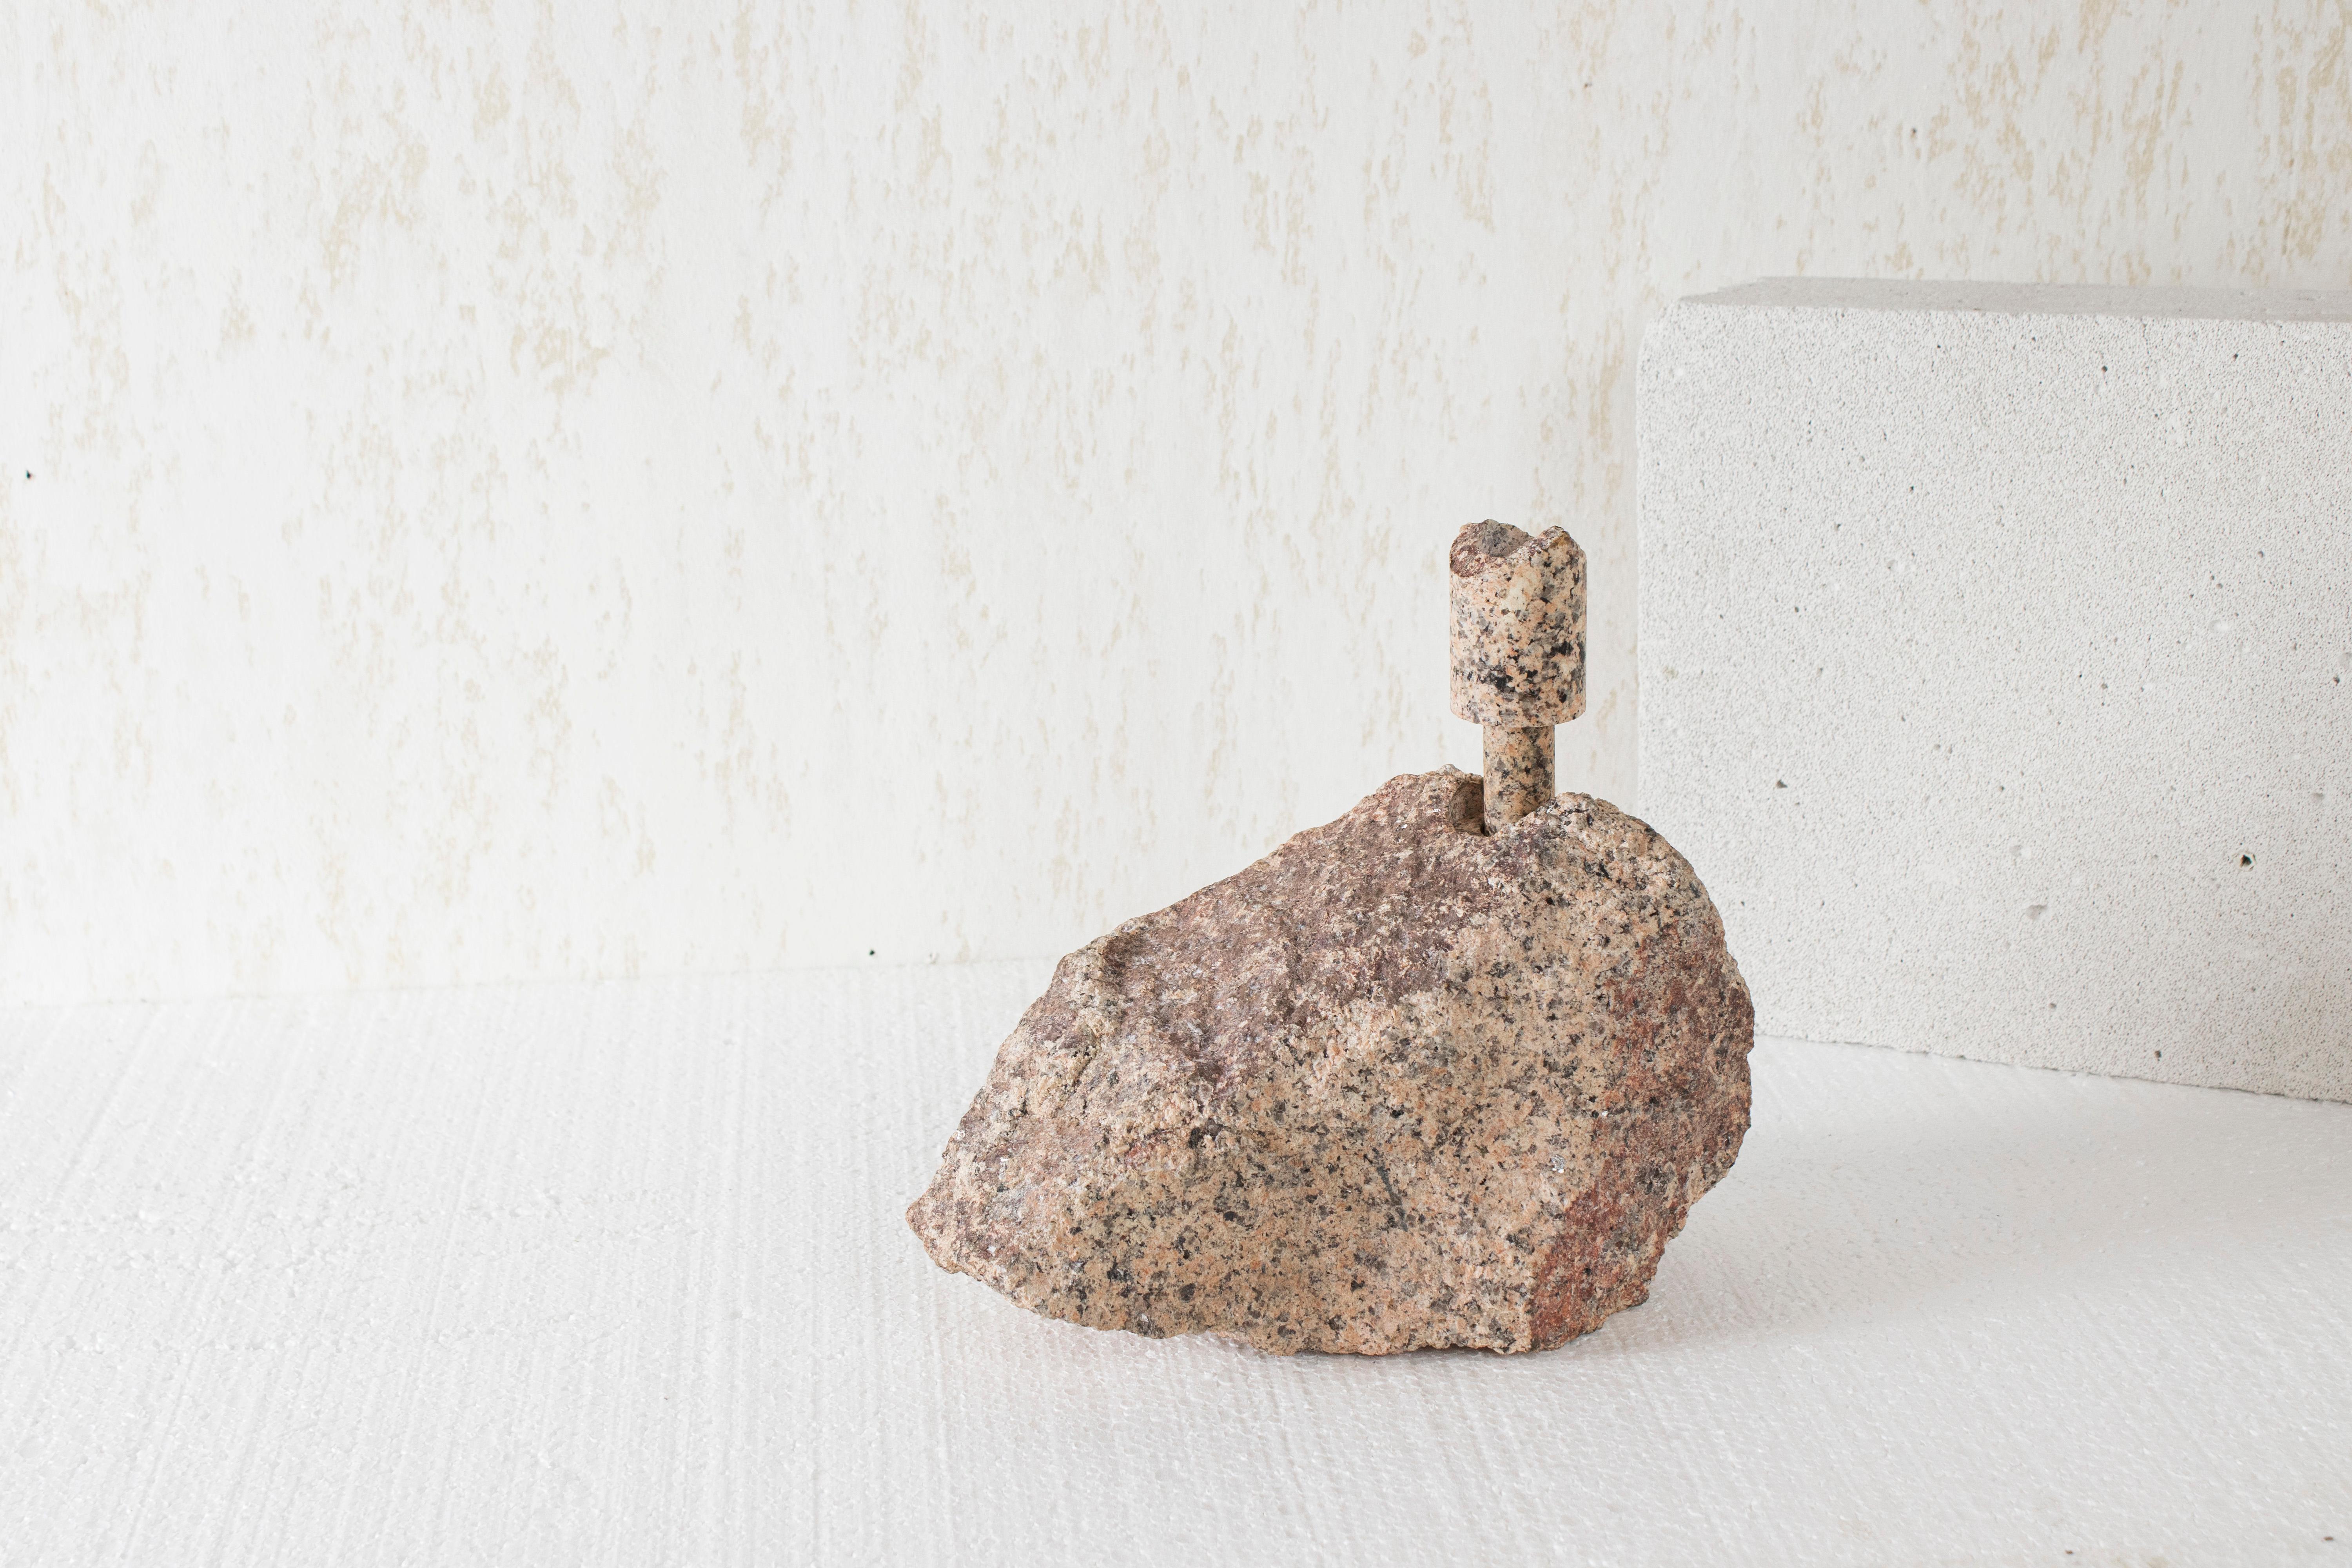 Pink Granite Abra Candelabra by Studio DO
Dimensions: D 25 x W 12 x H 23 cm
Materials: Pink granite, copper.
3 kg.

Stone and fire are connected in an ageless bond. A sparkle created by clashing two stones with each other has been igniting fire over